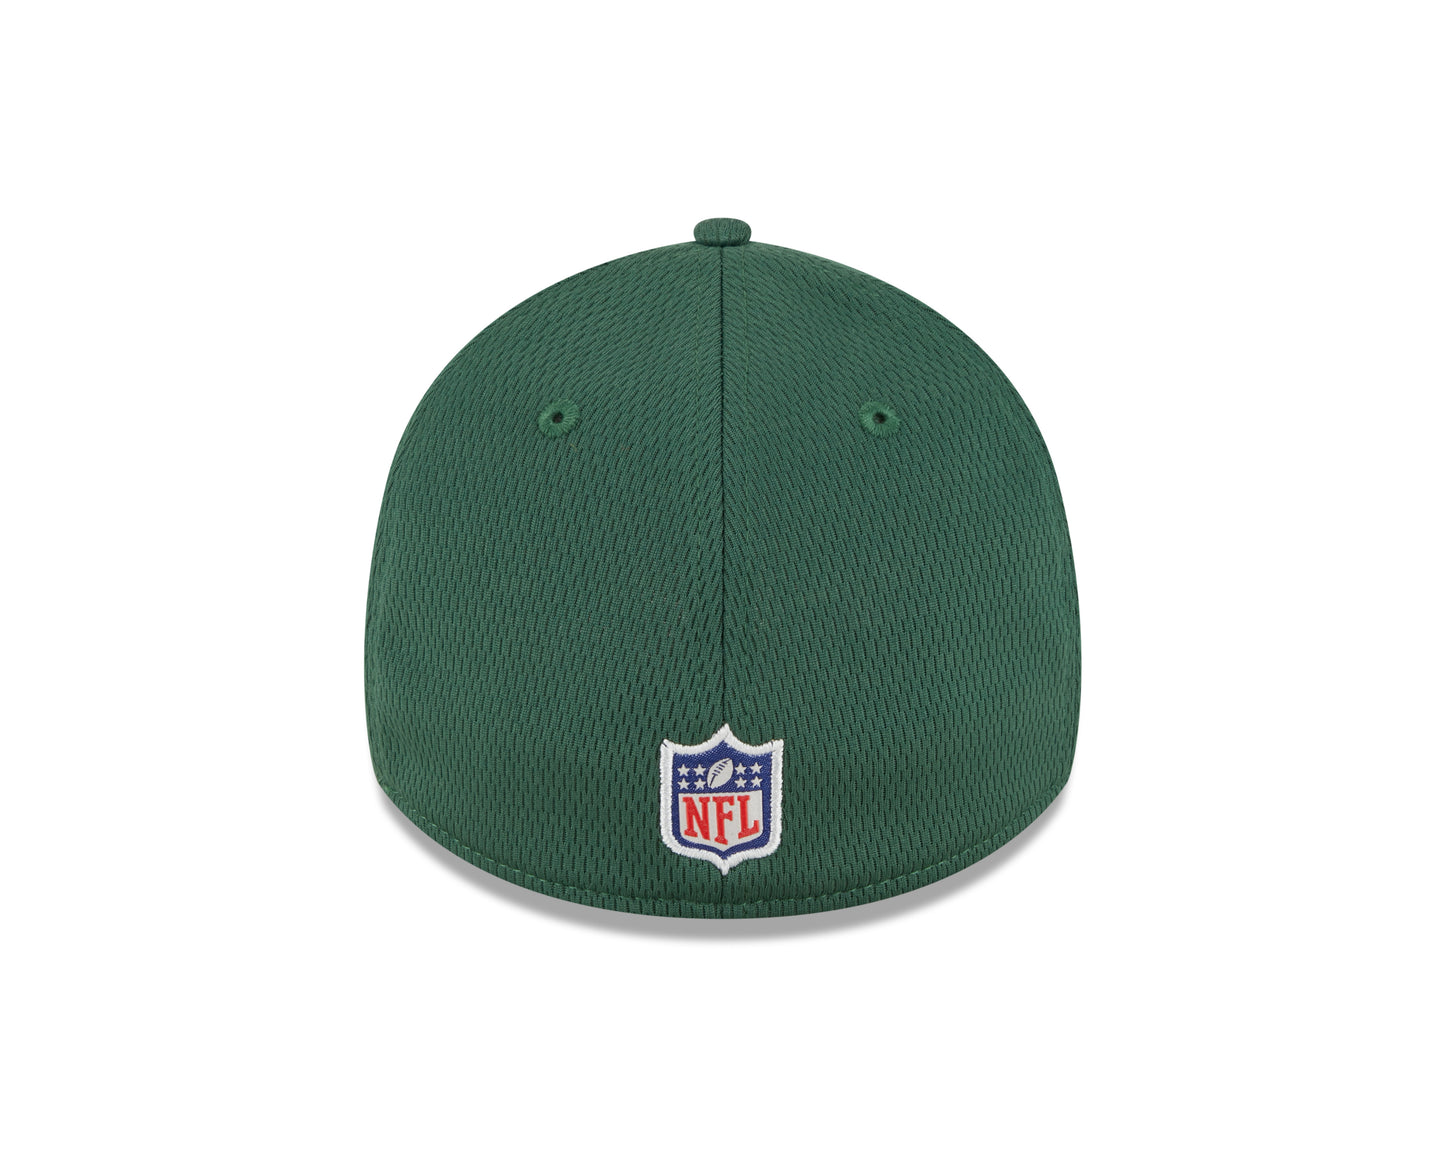 Men's Green Bay Packers New Era NFL 2023 Training Camp Green Primary Logo 39THIRTY Flex Fit Hat